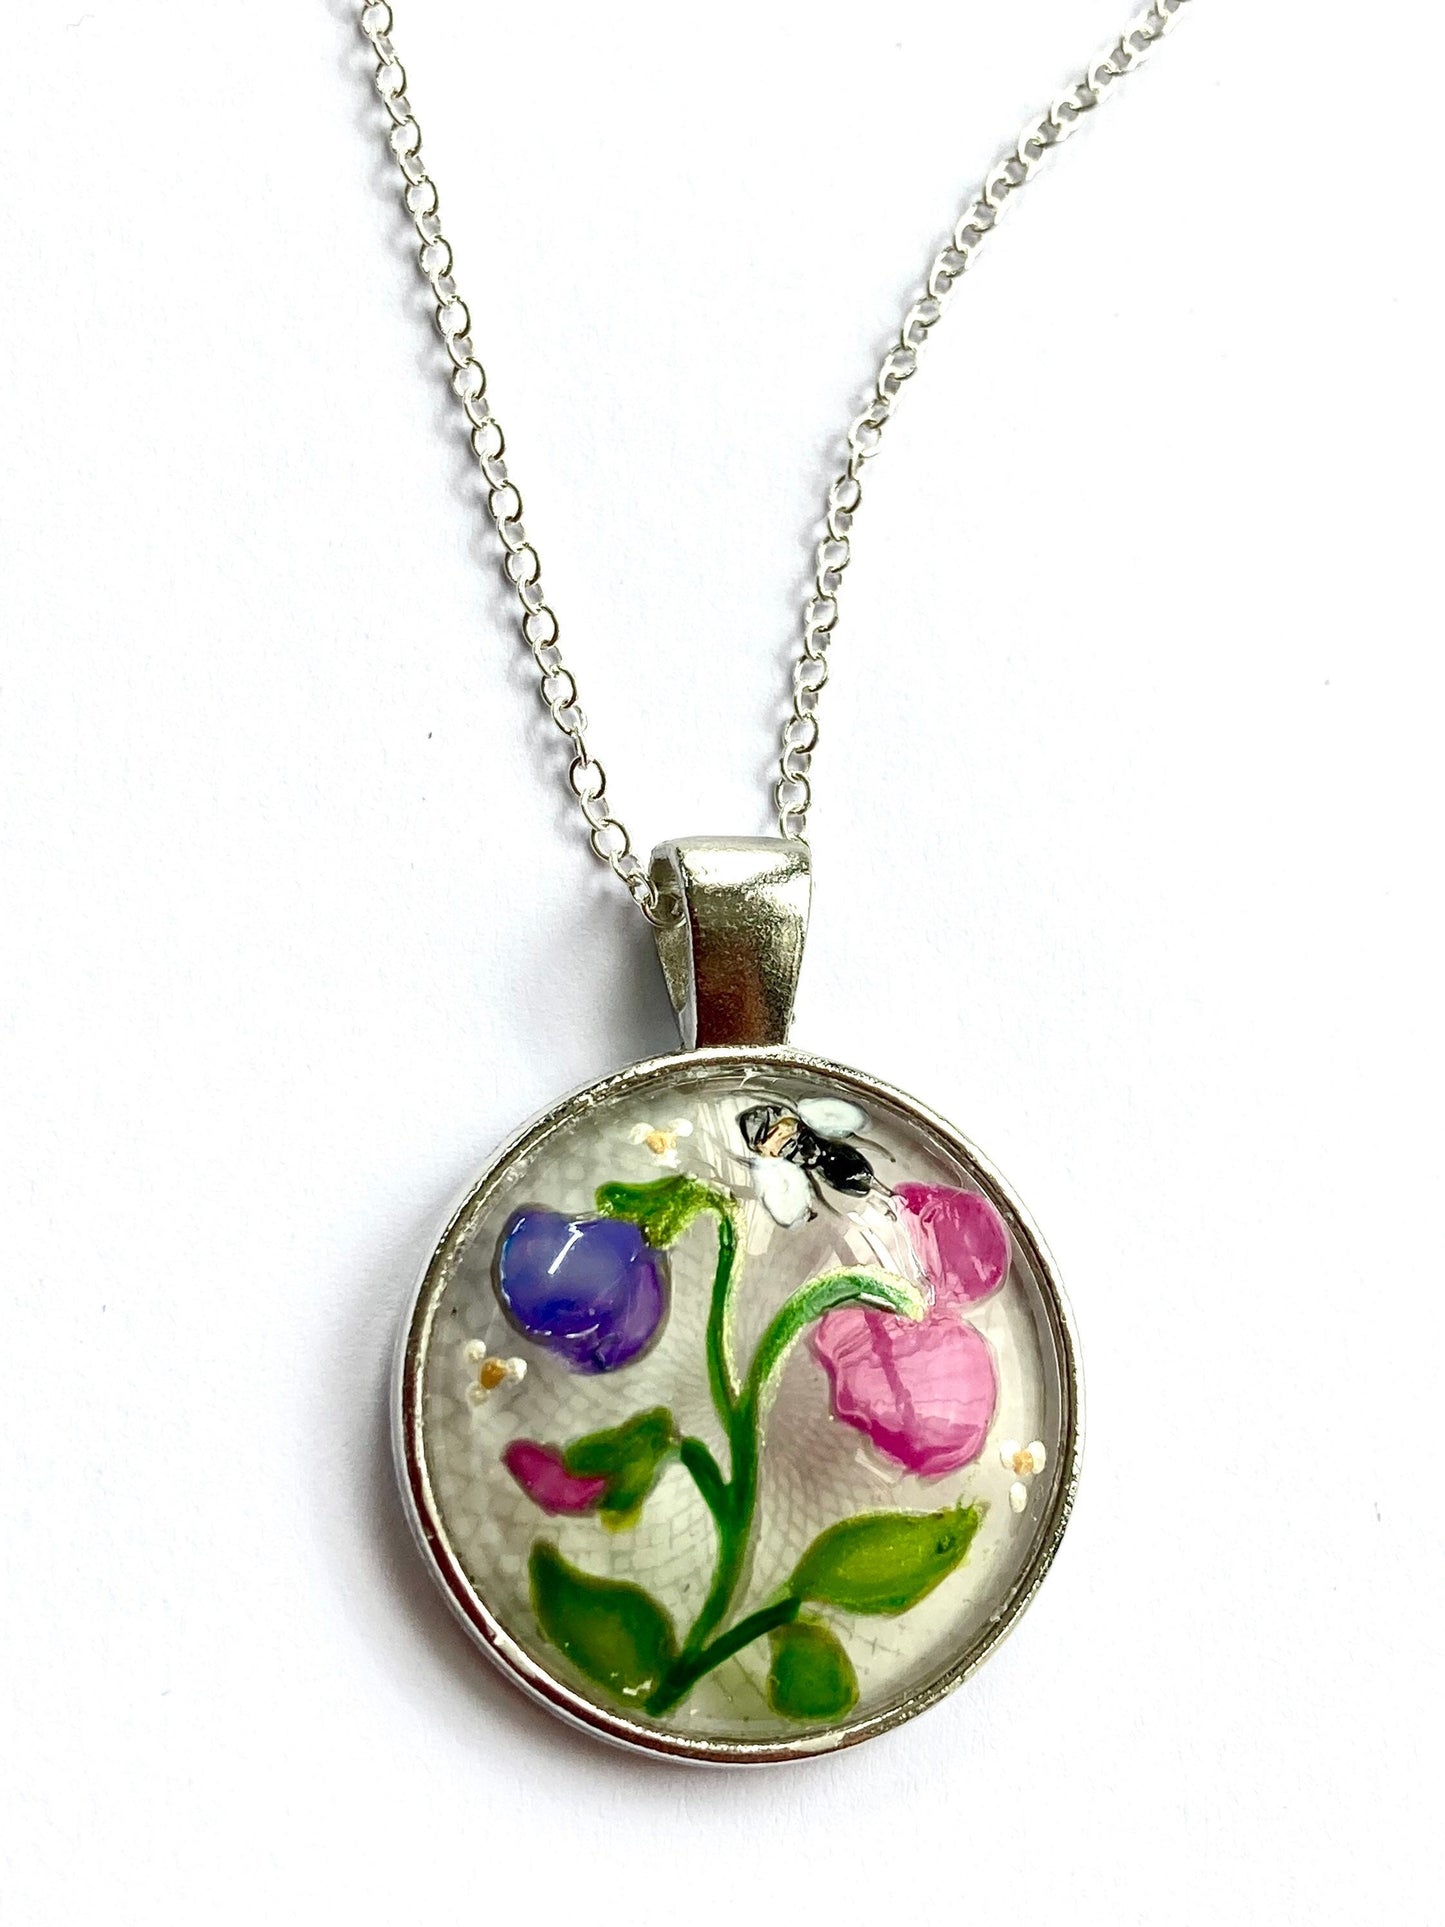 Sweet Pea and Bee hand painted glass pendant necklace